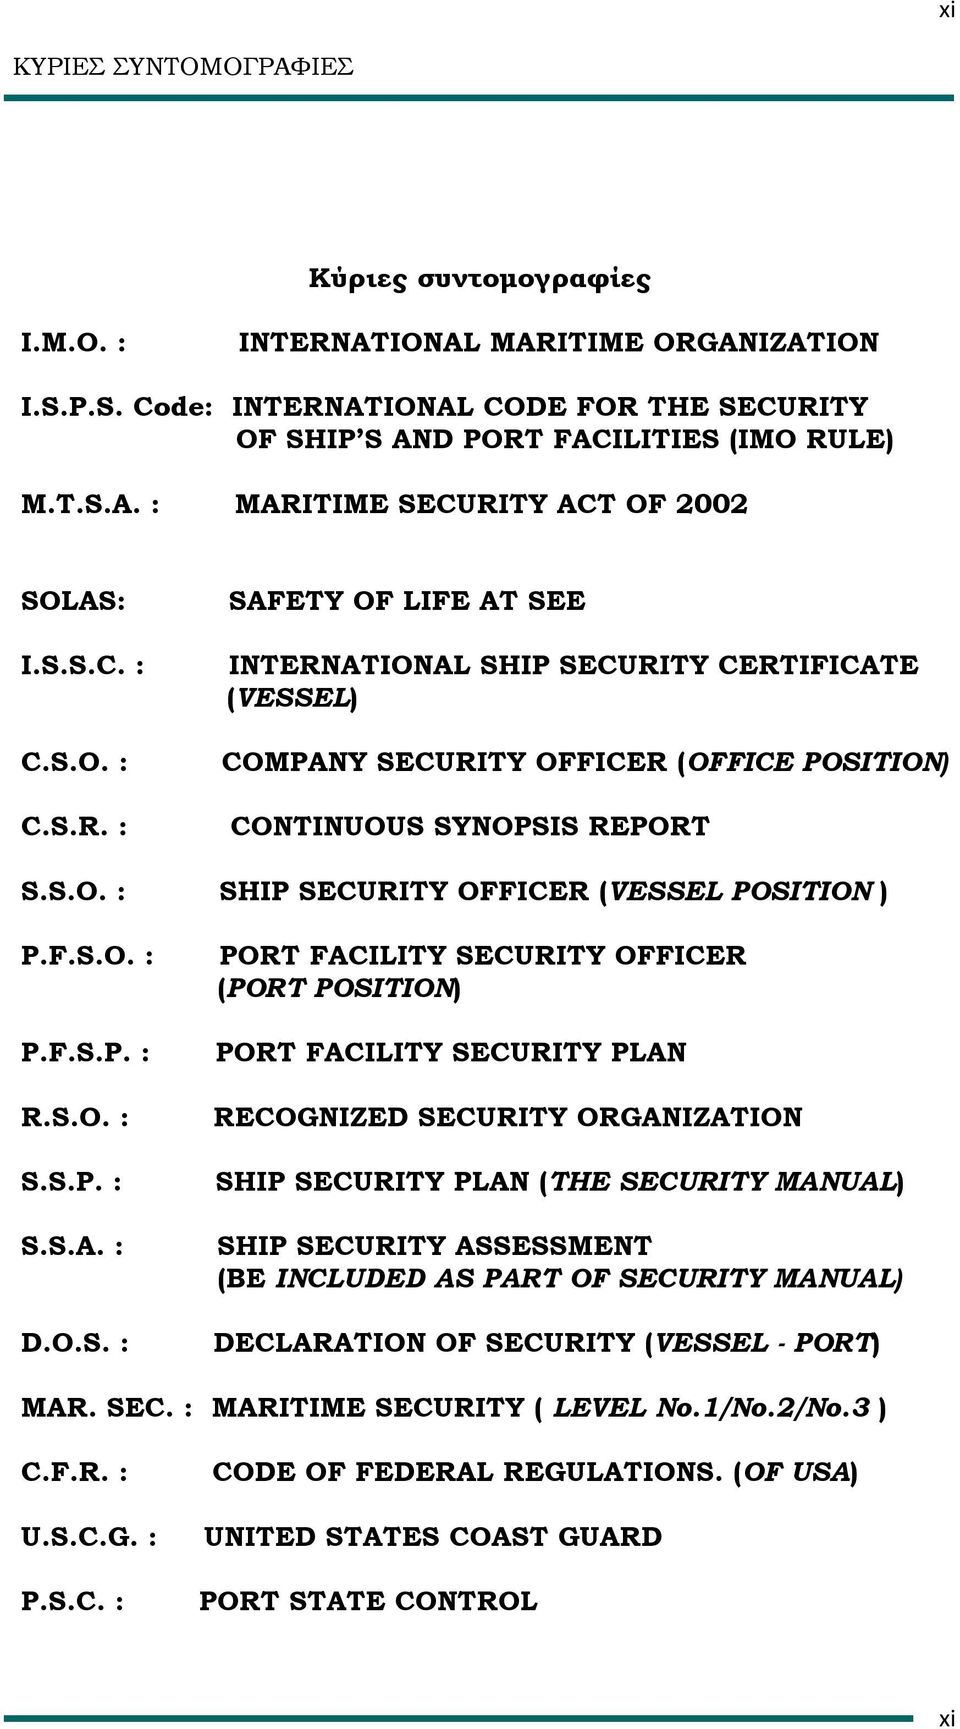 F.S.O. : P.F.S.P. : R.S.O. : S.S.P. : S.S.A. : D.O.S. : PORT FACILITY SECURITY OFFICER (PORT POSITION) PORT FACILITY SECURITY PLAN RECOGNIZED SECURITY ORGANIZATION SHIP SECURITY PLAN (THE SECURITY